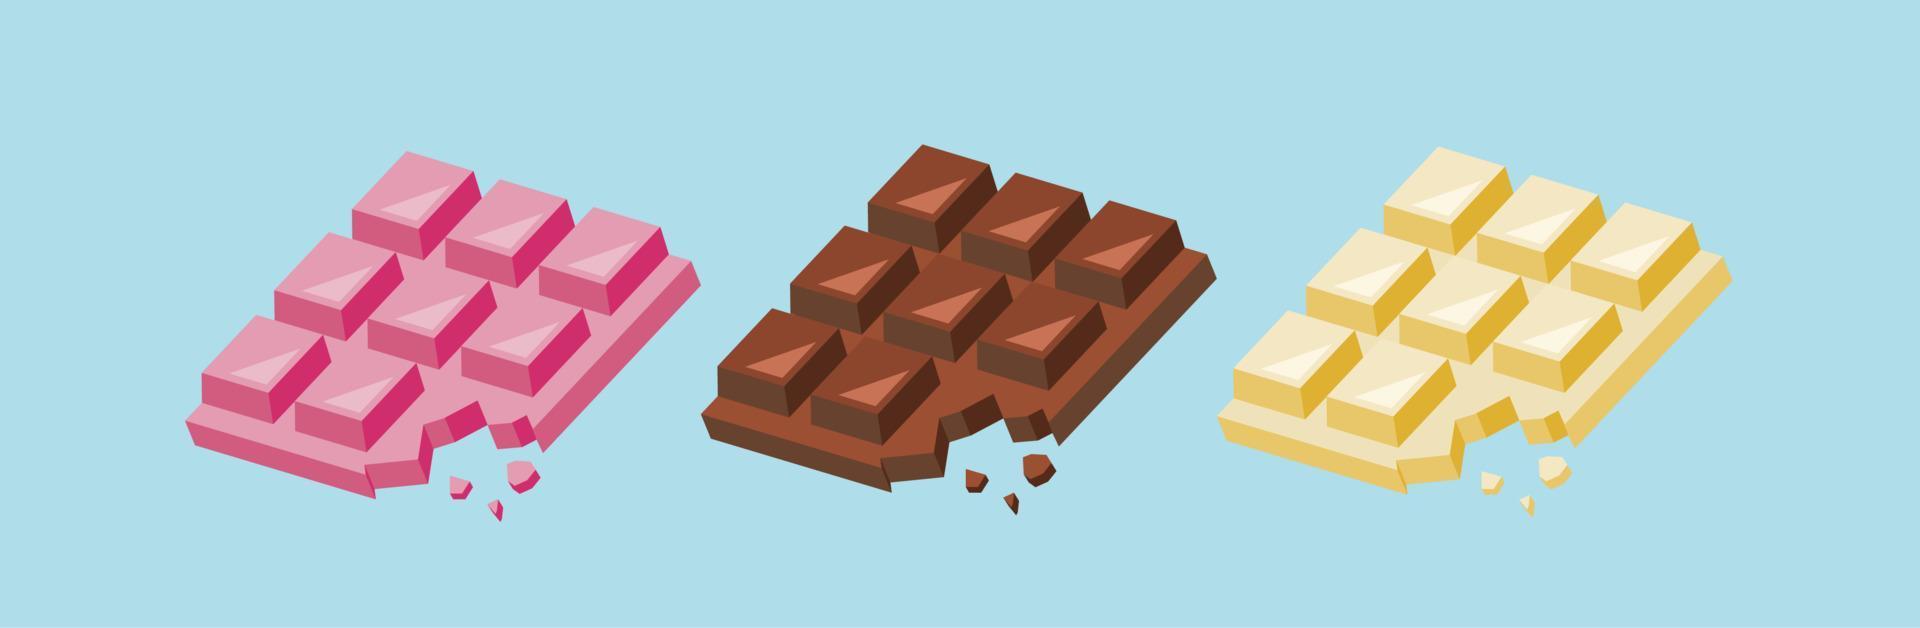 chocolate bars isolated Vector illustration. Chocolate. Pieces, shavings, cocoa fruit. Dark, Milk and Pink Strawberry Chocolates For Valentine's day and White Day. Ingredient for Sweet Dessert, Cake